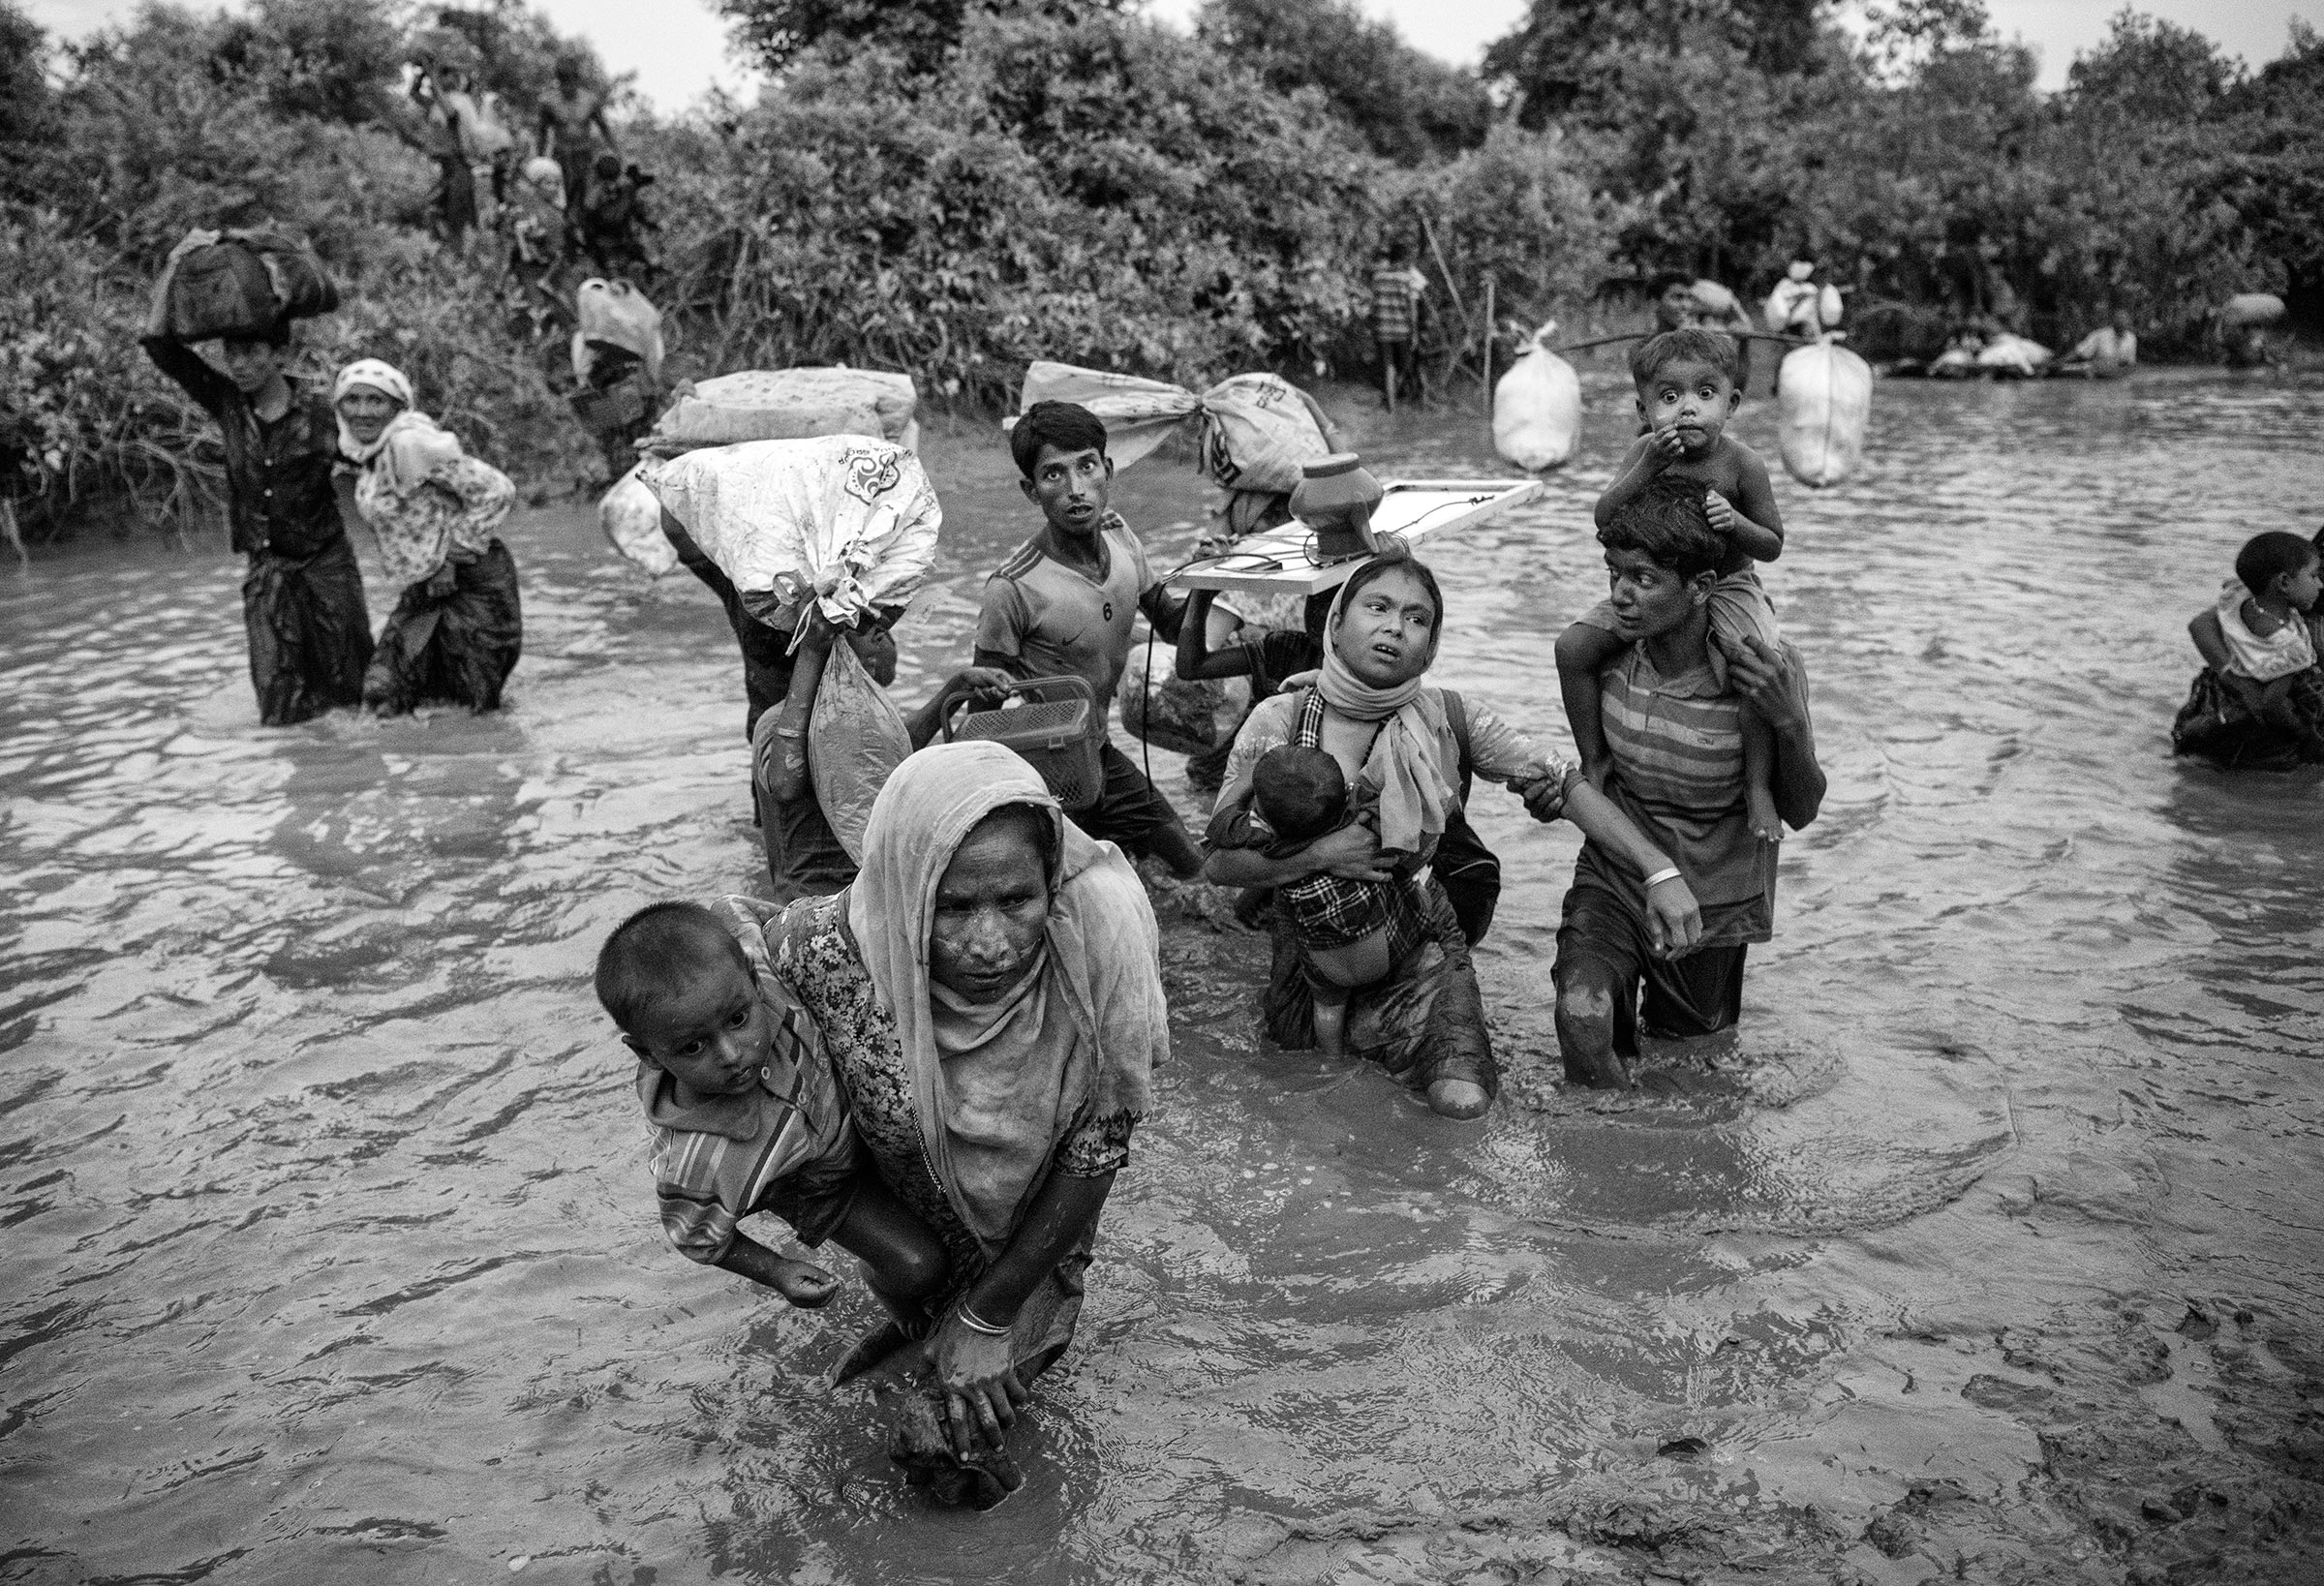 Rohingya Muslim refugees cross a canal as they flee over the border from Myanmar into Bangladesh at the Naf River on Nov. 1, 2017 near Anjuman Para in Cox's Bazar, Bangladesh. (Kevin Frayer—Getty Images)